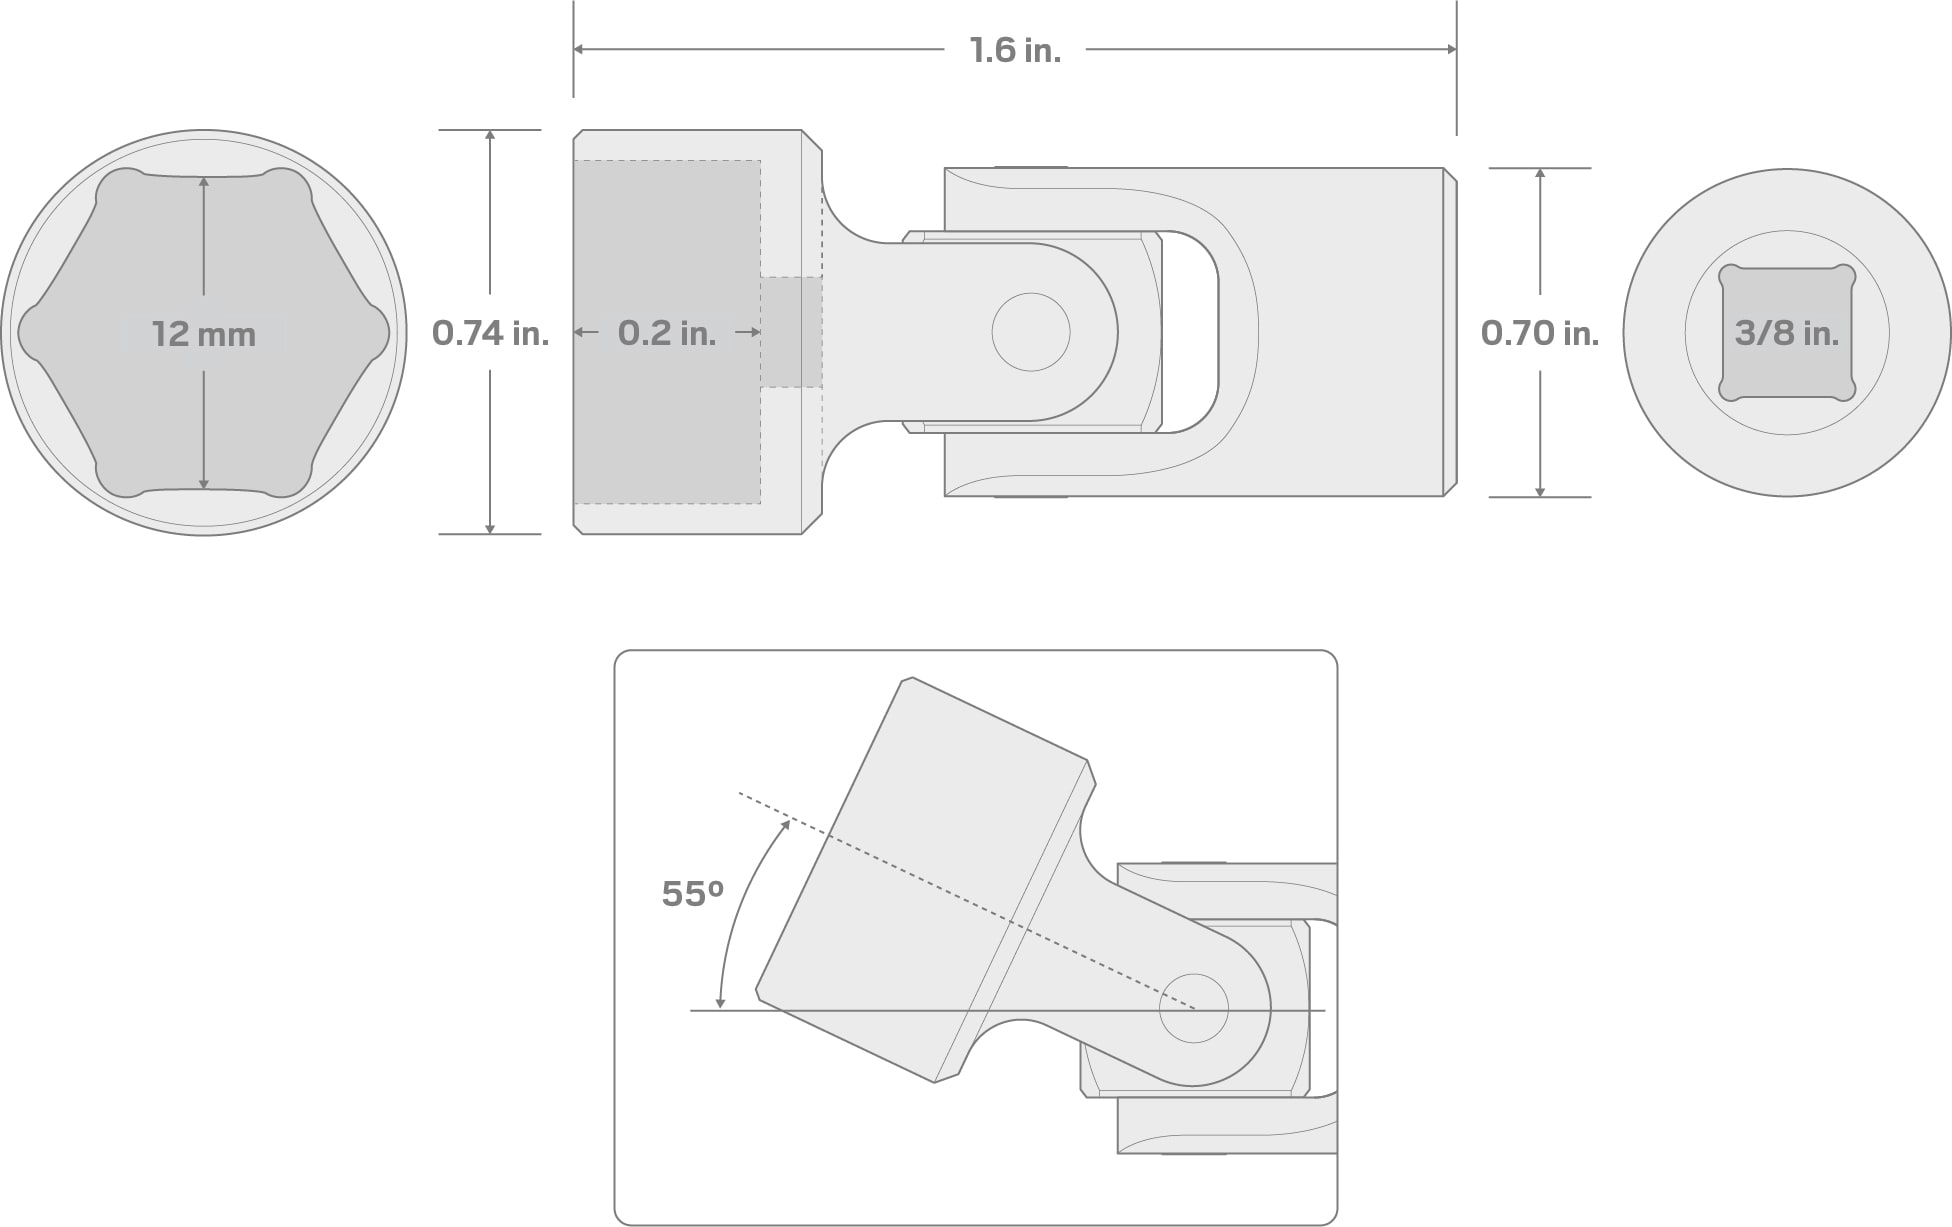 Specs for 3/8 Inch Drive x 12 mm Universal Joint Socket